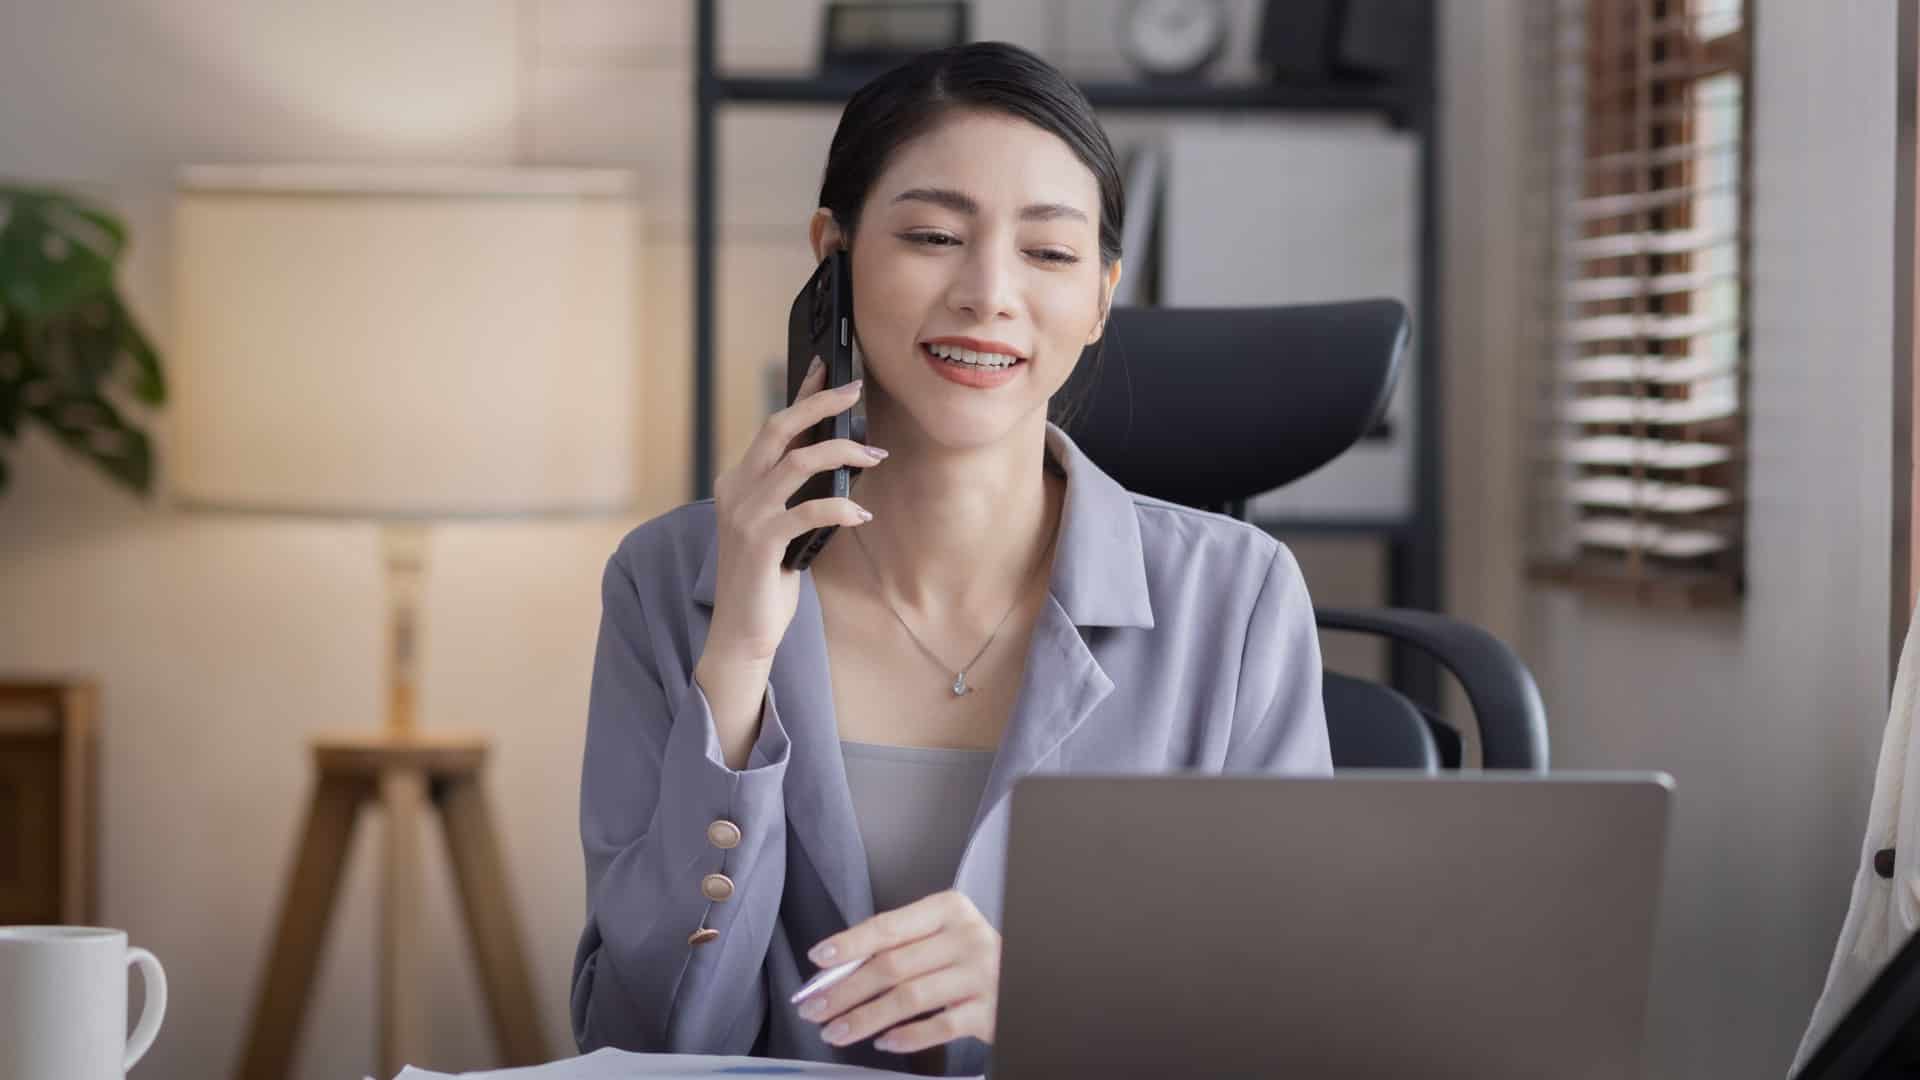  A woman talks on the phone while looking at a laptop in this image from Shutterstock.